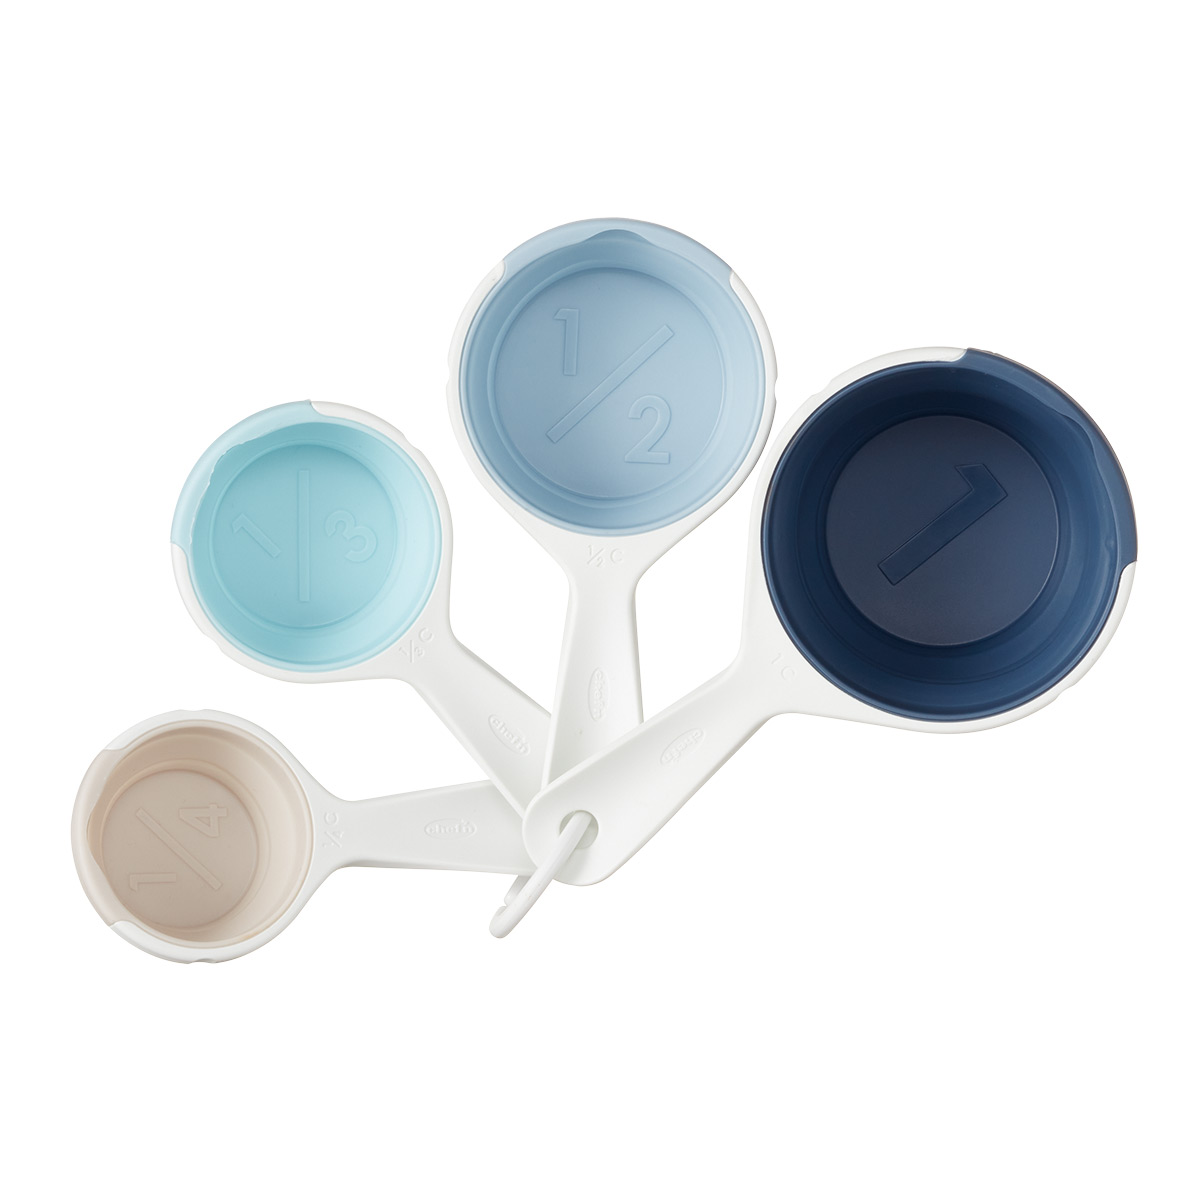 https://www.containerstore.com/catalogimages/476138/10050172-collapsible-measuring-cups-.jpg